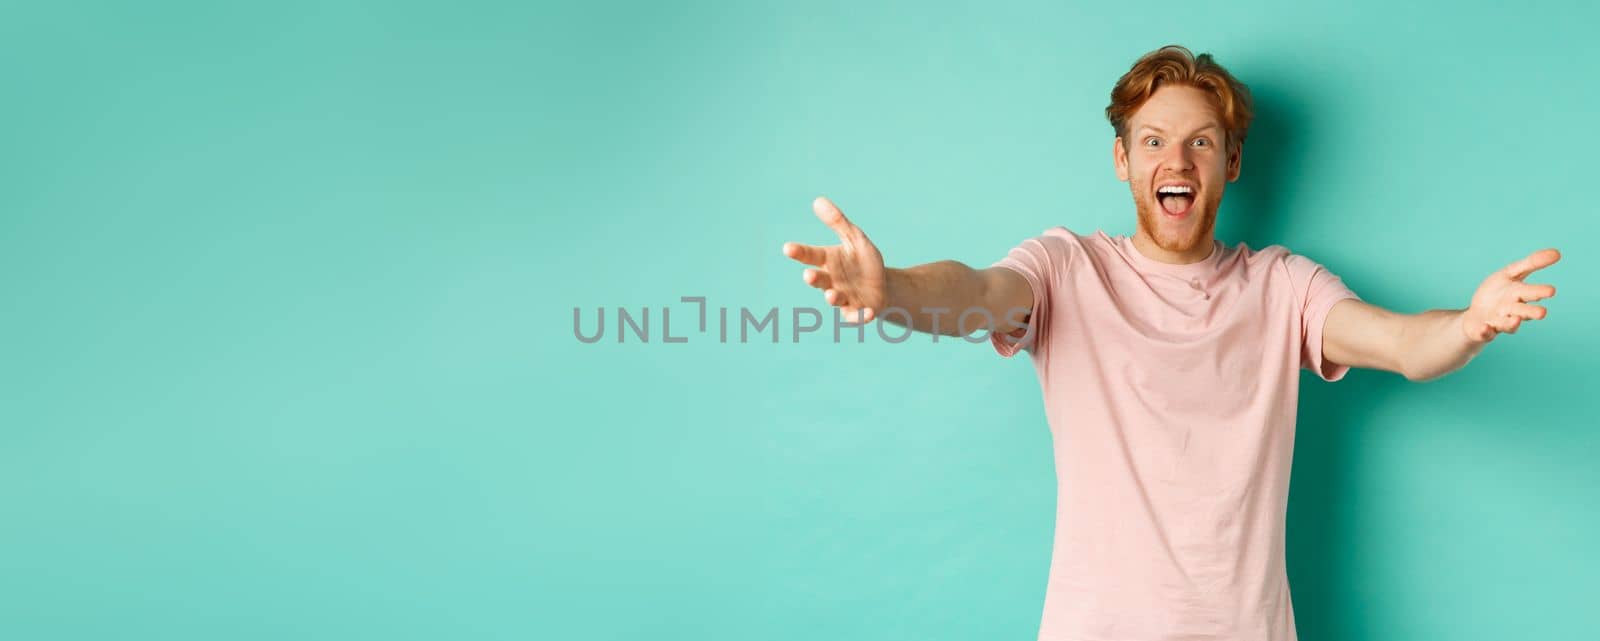 Friendly and happy young man with ginger hair, stretch out hands in warm welcome, reaching for hug and smiling joyfully, standing in t-shirt over mint background by Benzoix